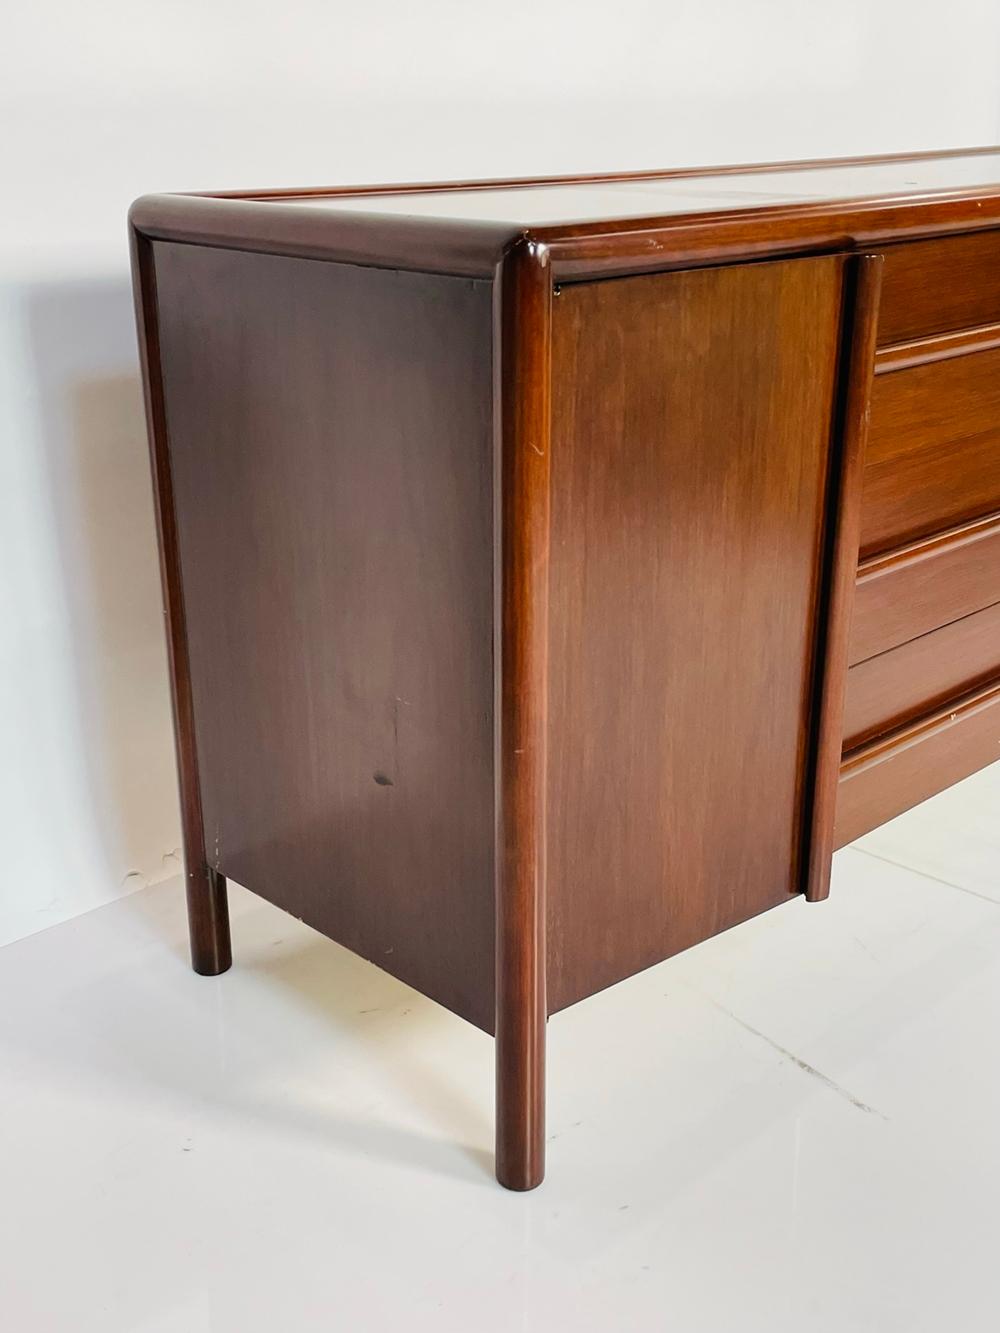 Beautiful sideboard cabinet designed and manufactured in the 1950s by T.H. Robsjohn Gibbings.
The piece has 3 large drawers and two side cubbies for extra storage.Great design with great proportions.
Measurements:
67 inches wide x 21 inches deep